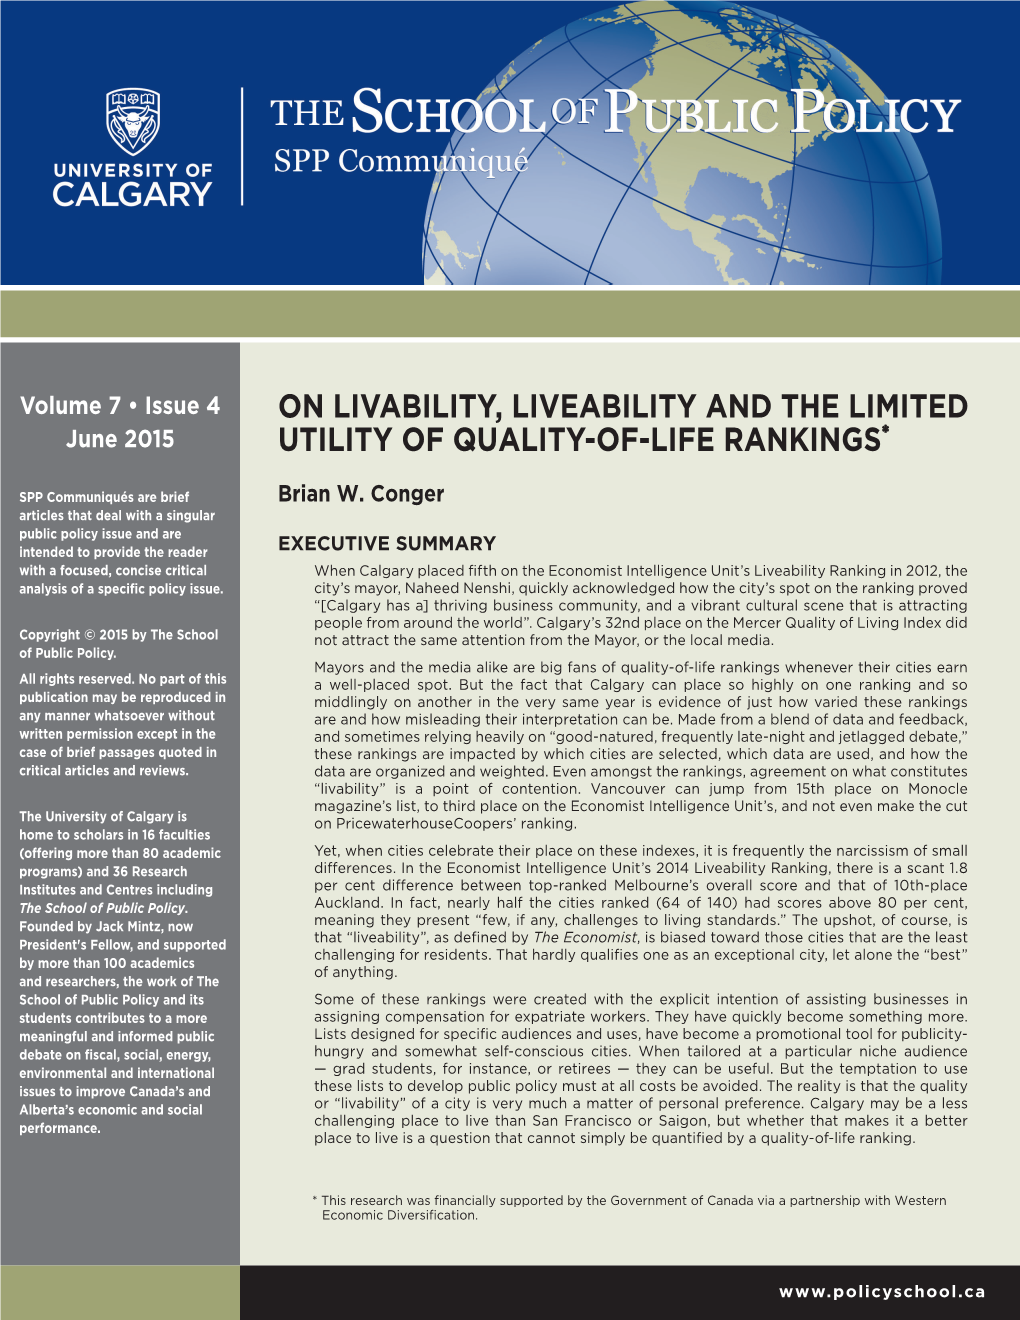 On Livability, Liveability and the Limited Utility of Quality